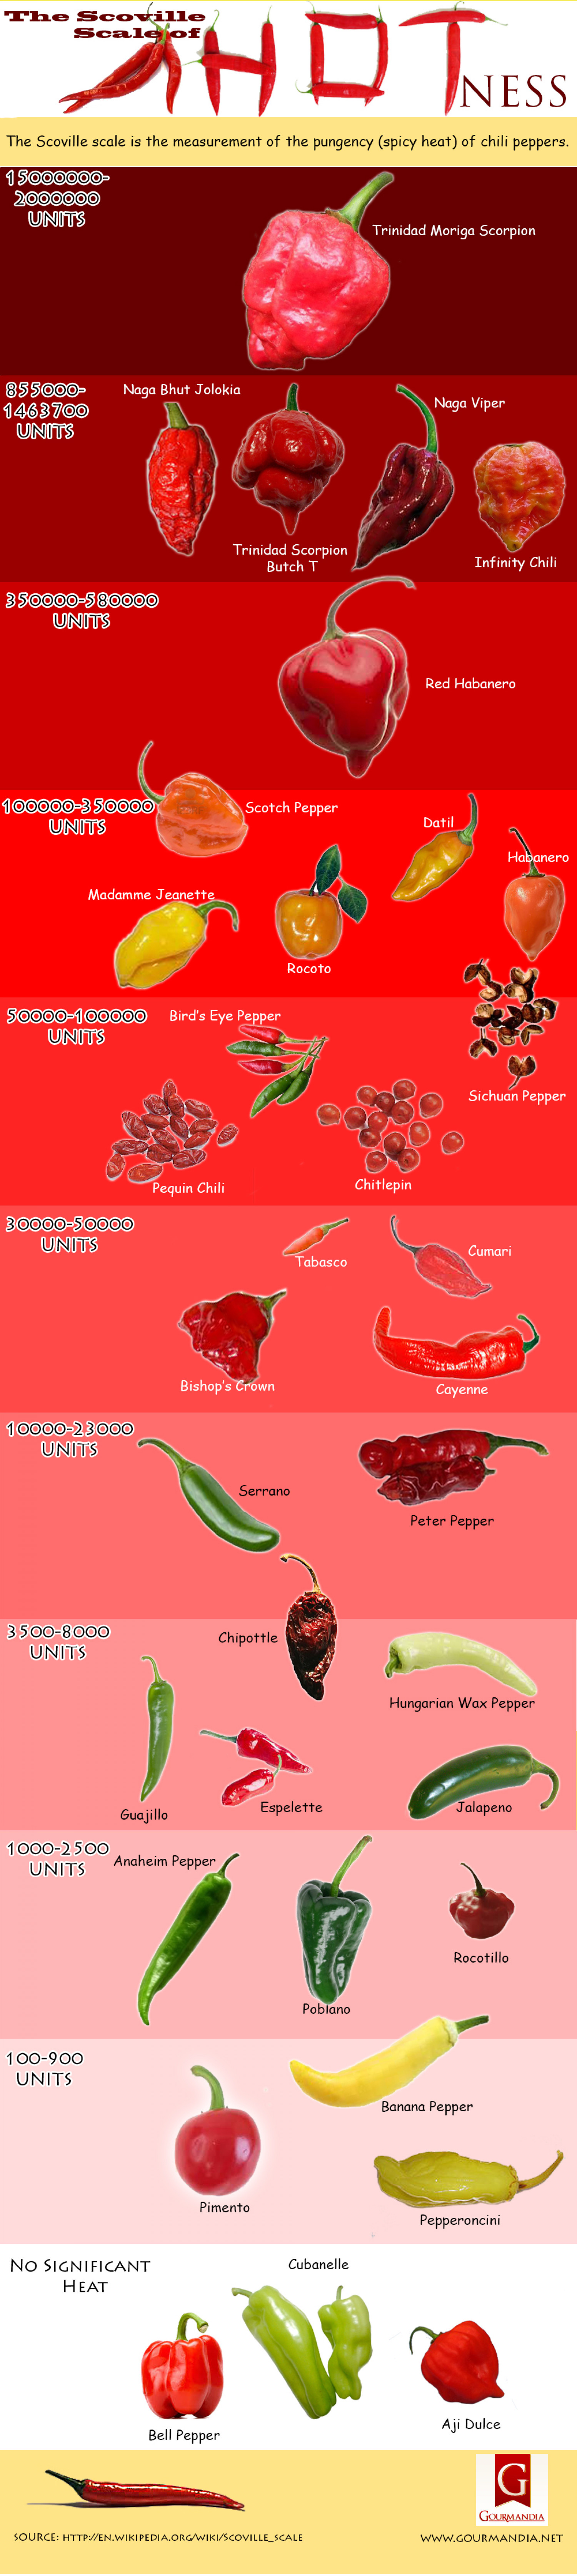 https://i.visual.ly/images/the-scoville-scale-of-hotness_516e708835c8d_w1500.jpg